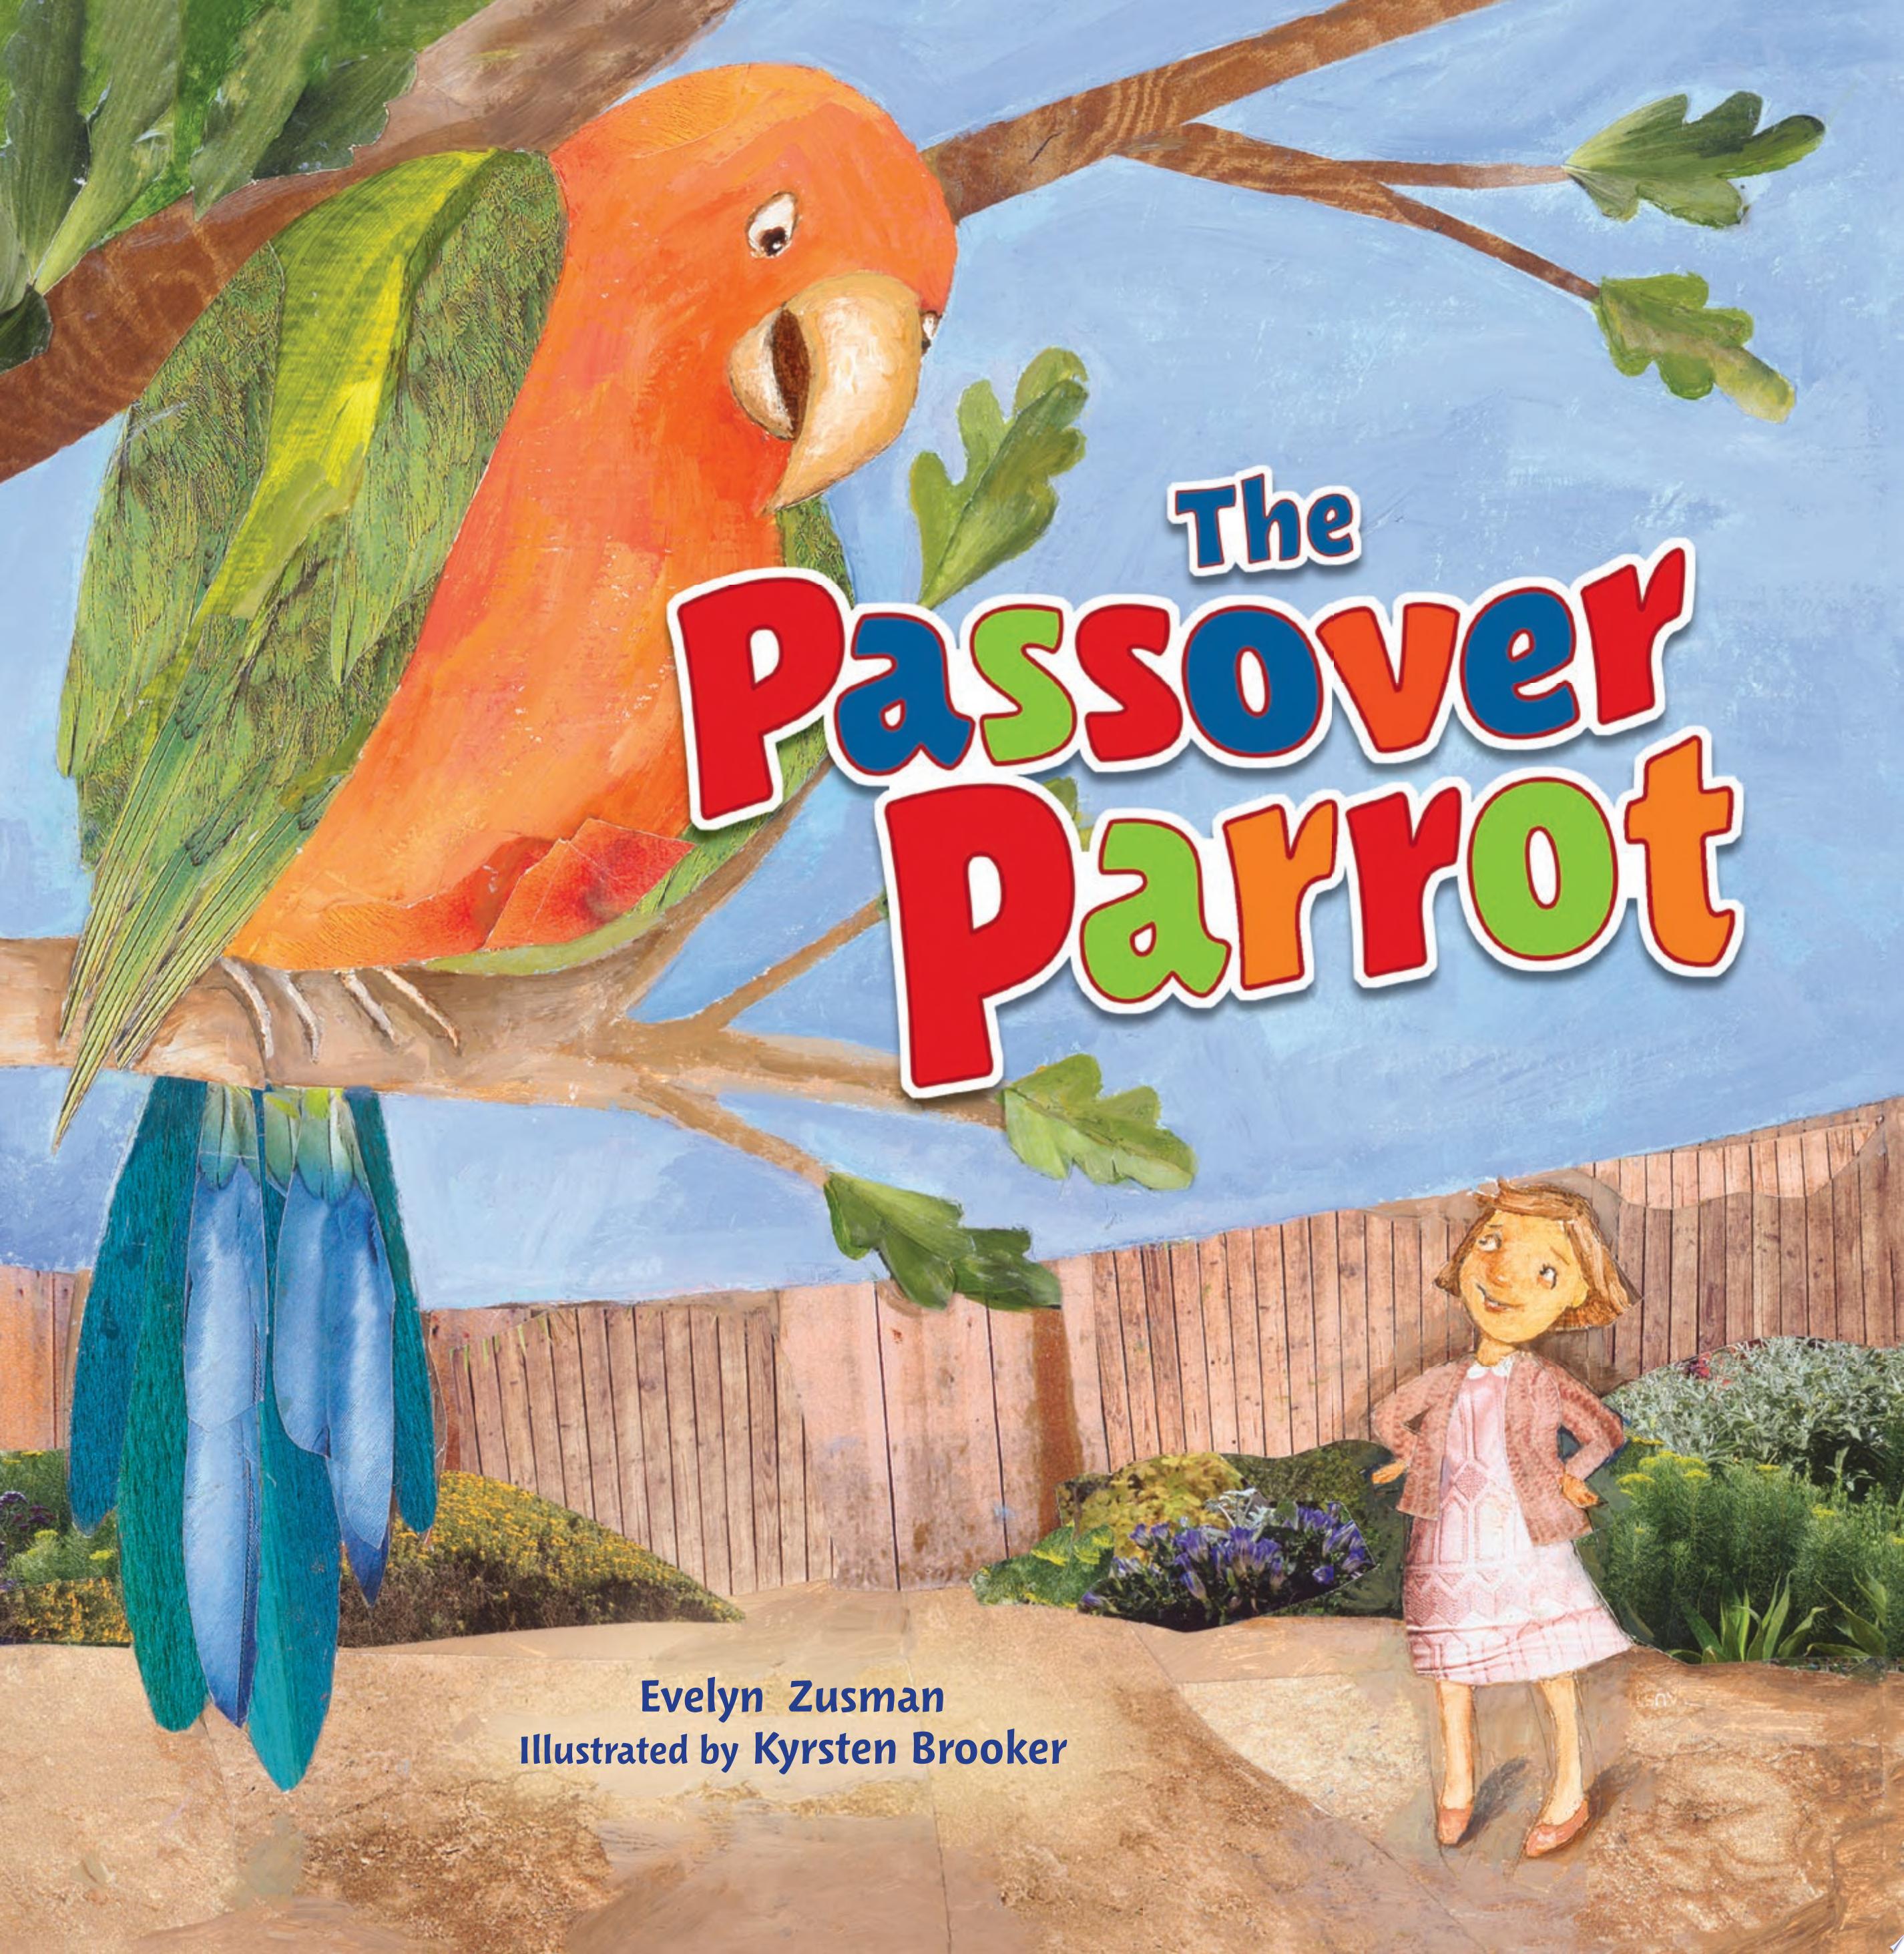 Image for "The Passover Parrot"